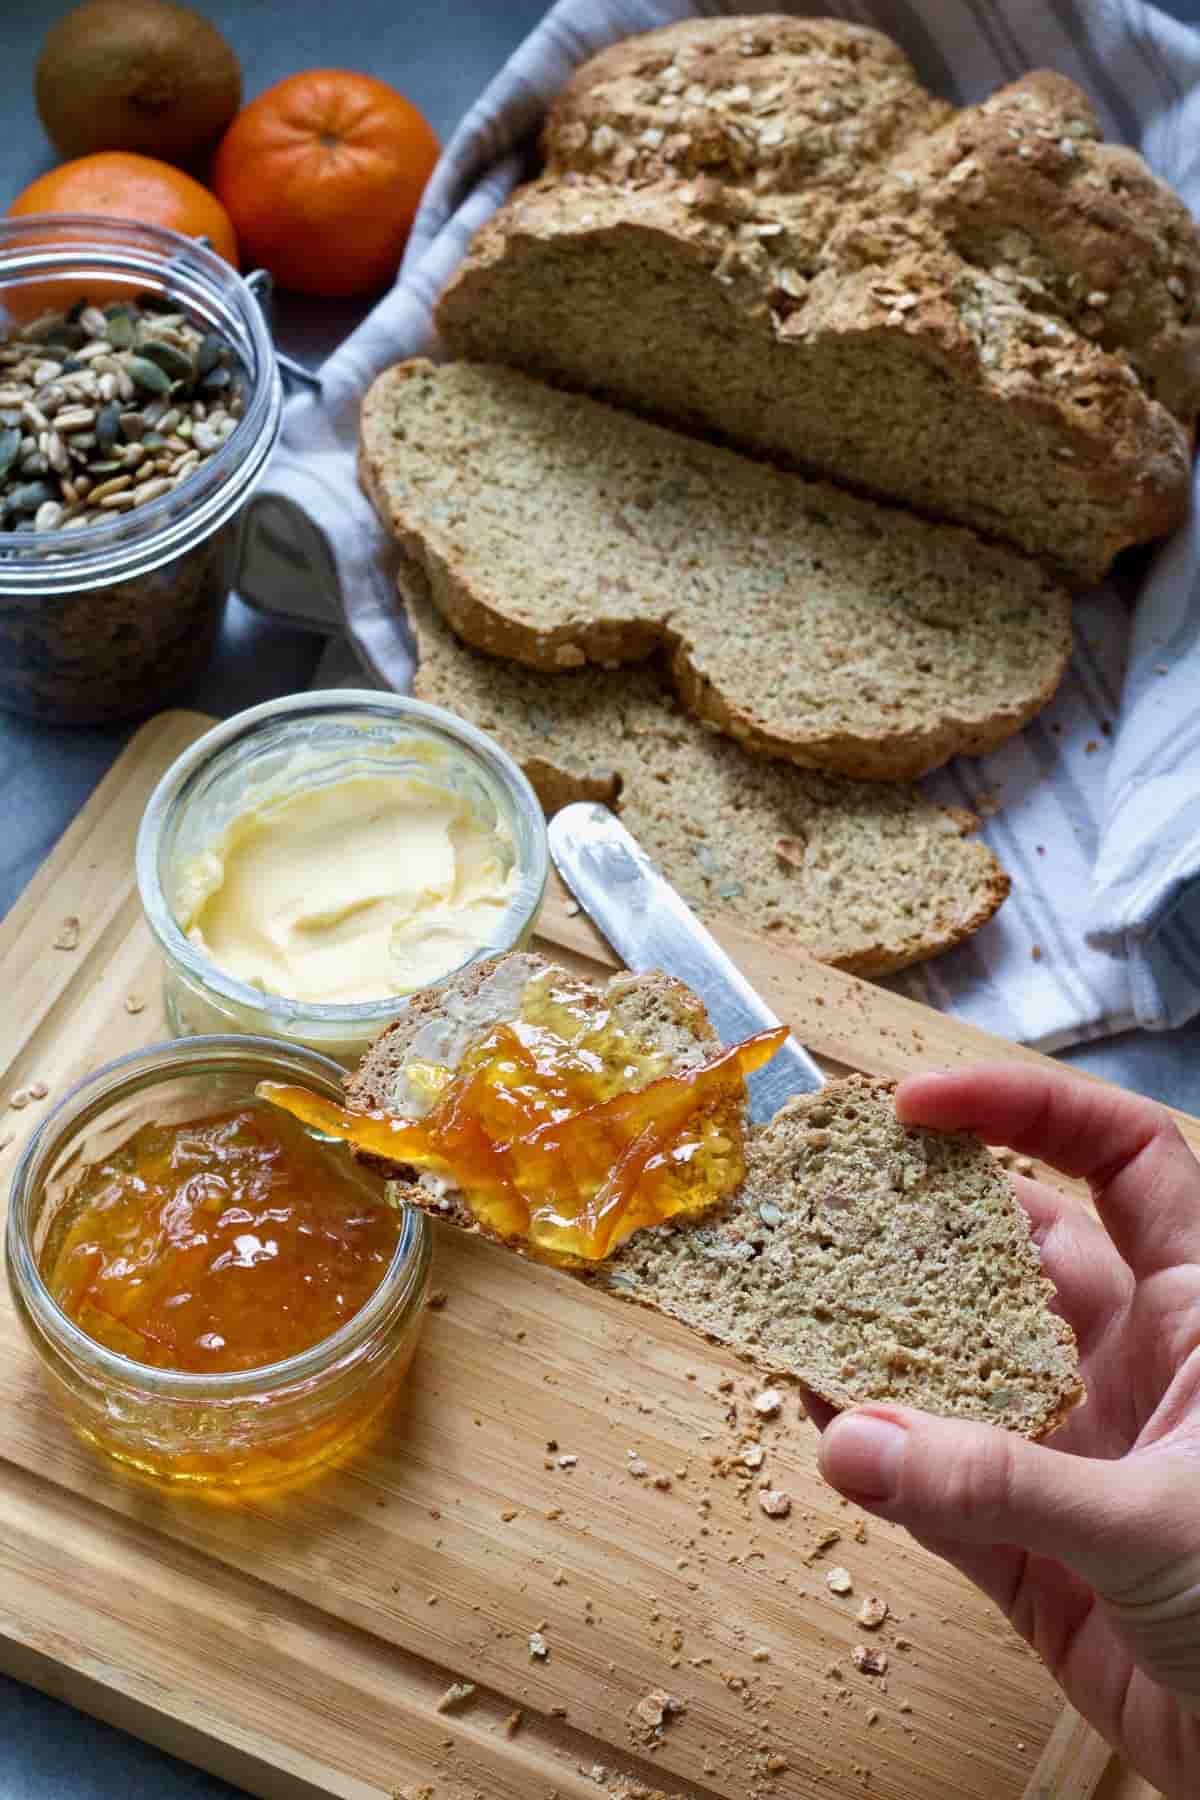 Hand holding slice of bread half of which is topped with marmalade.